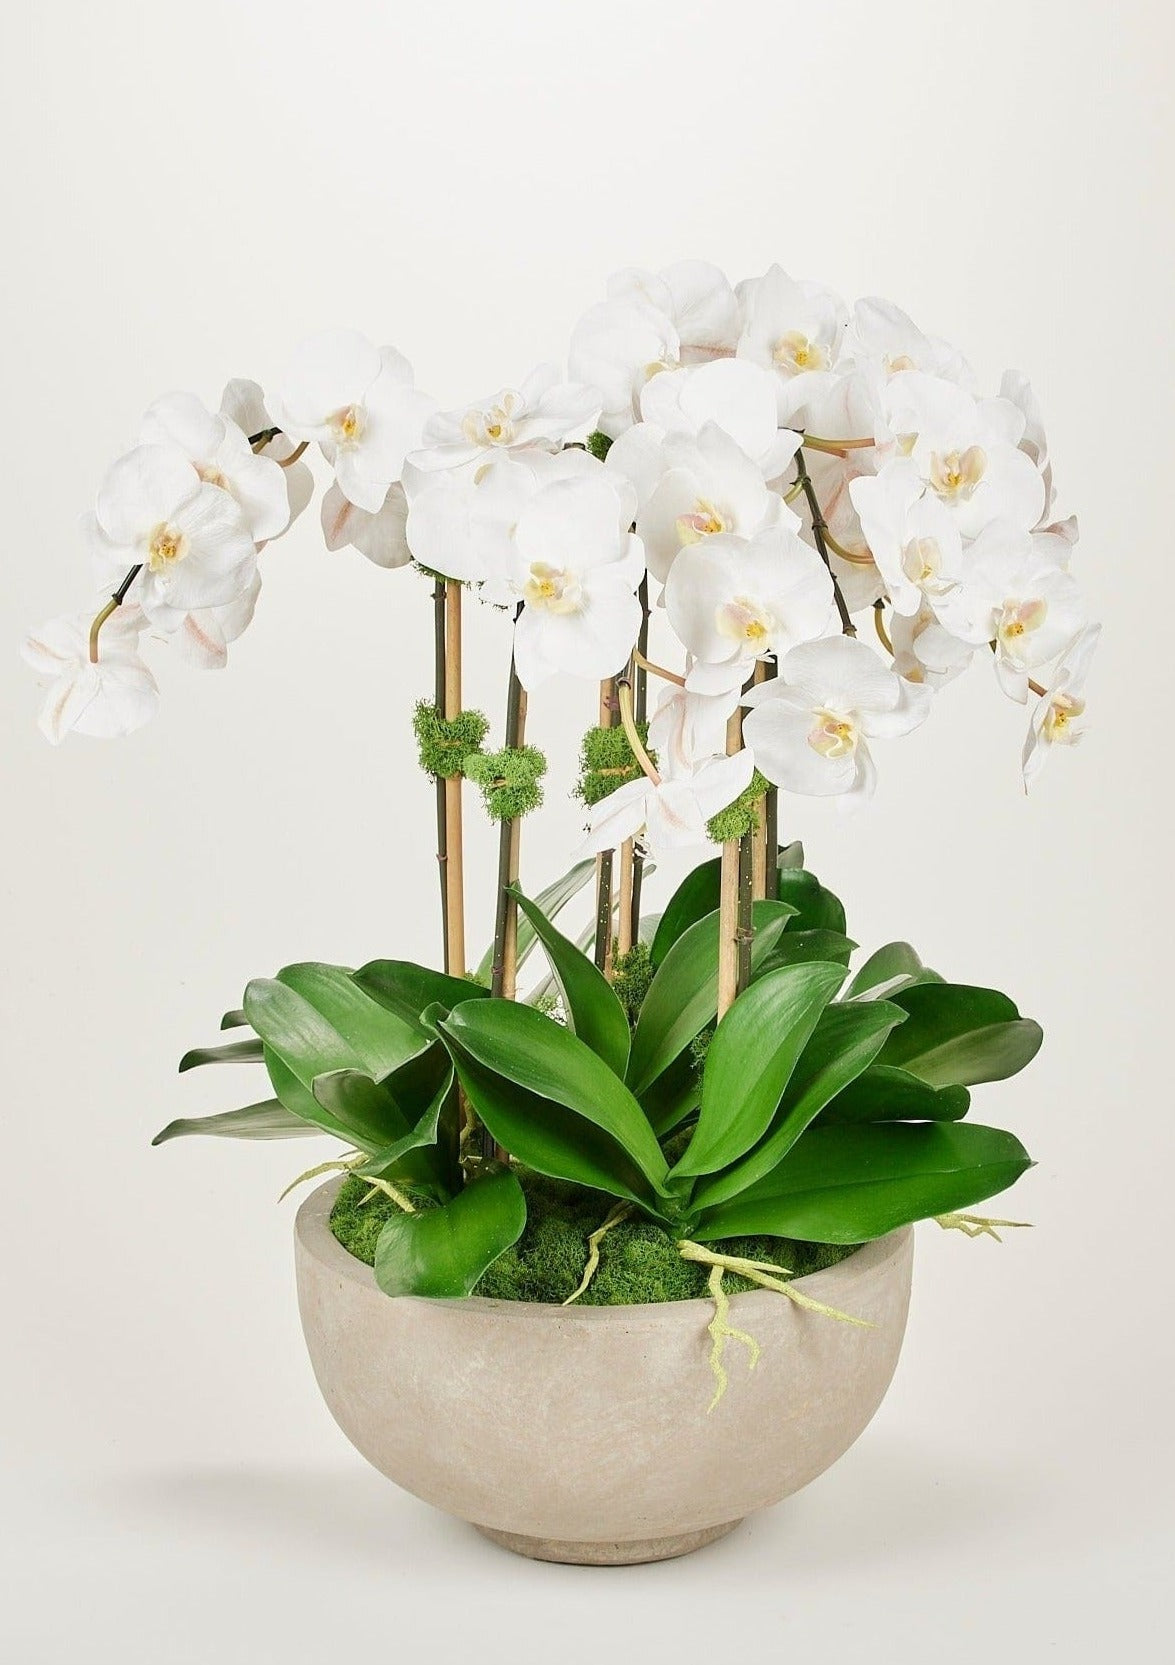 Afloral Potted Floral Arrangement of Faux White Orchids in Ceramic Bowl